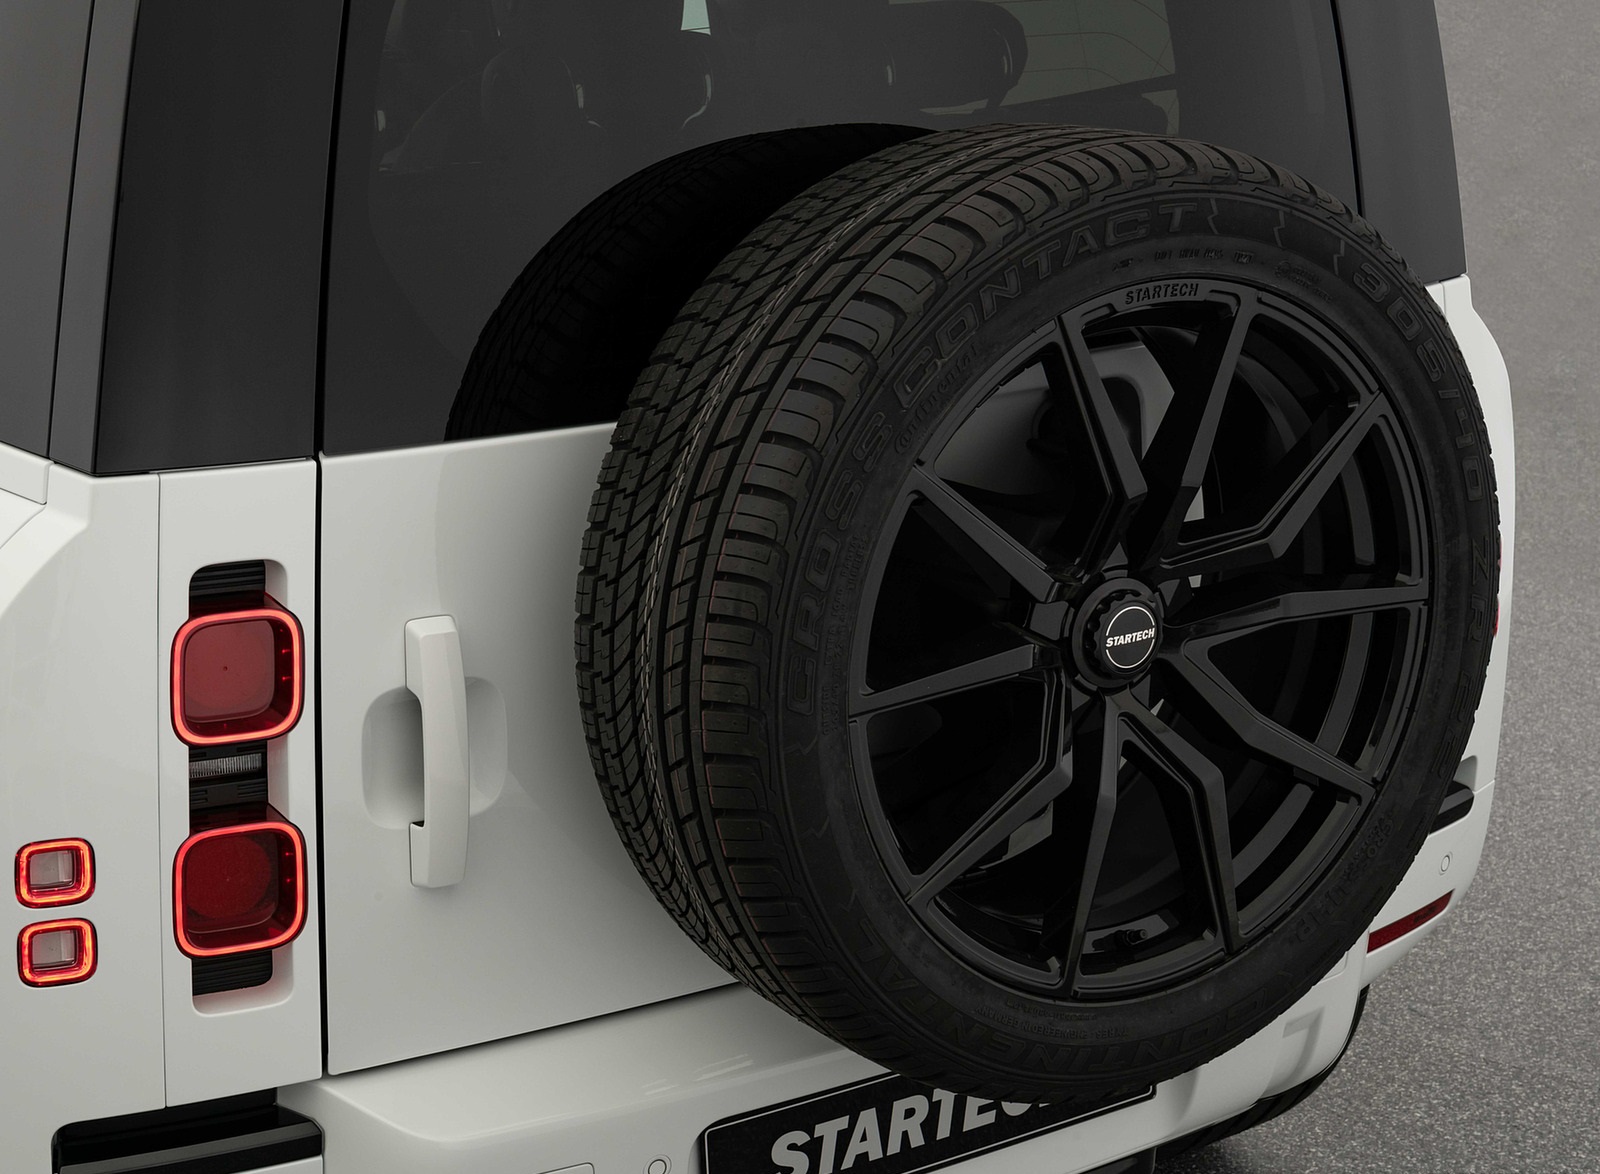 2021 STARTECH Land Rover Defender 90 Detail Wallpapers #64 of 74